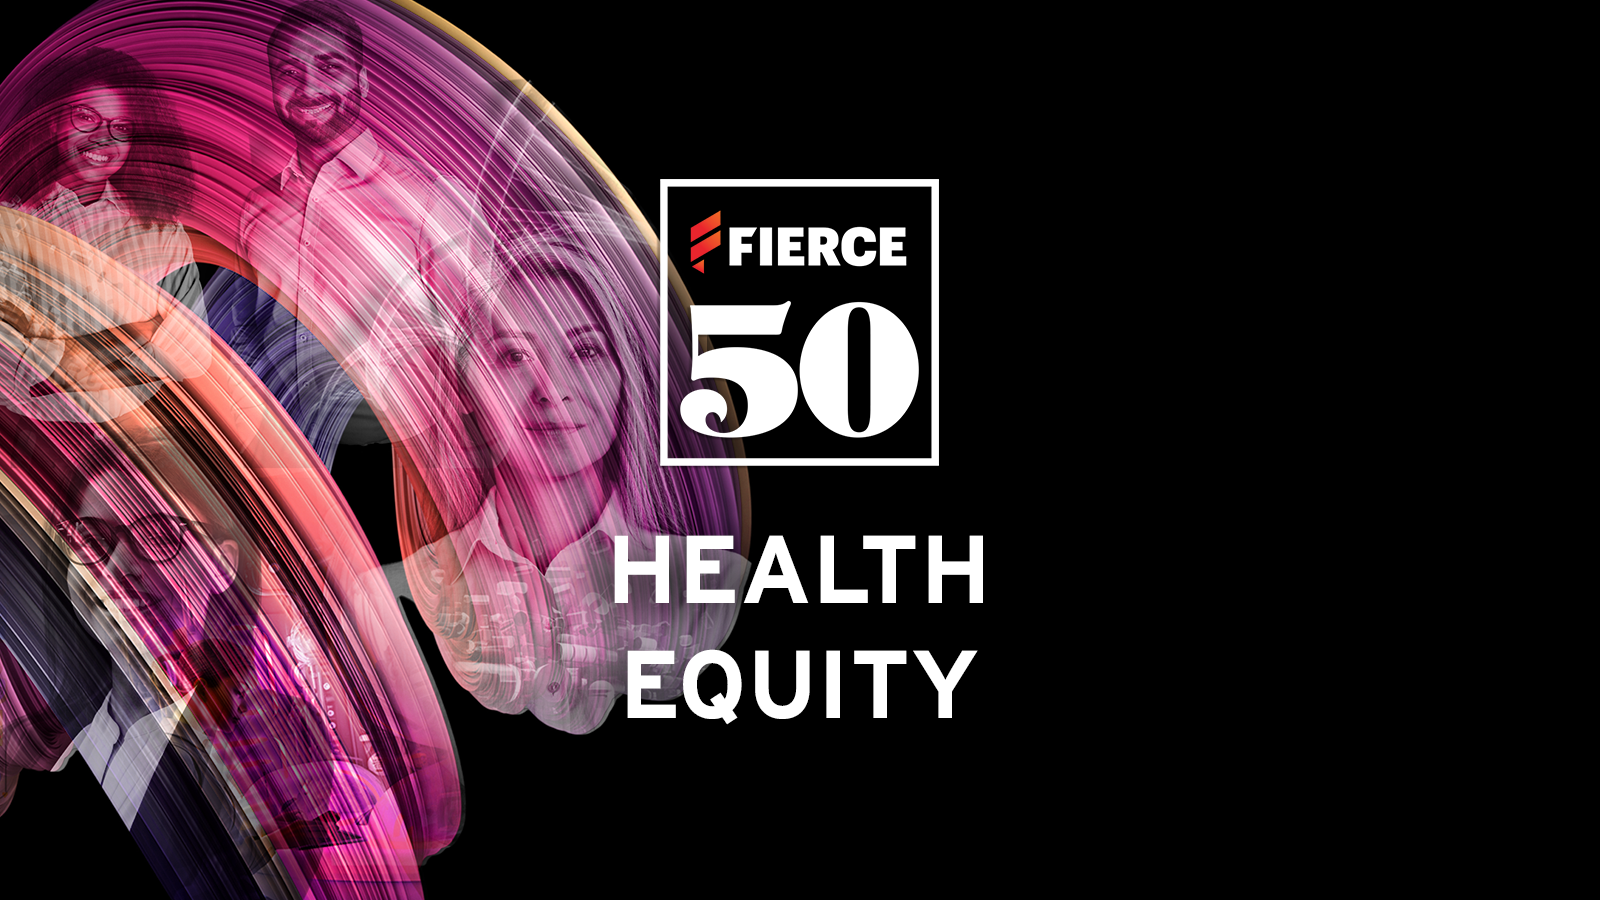 Fierce 50 Health Equity Category Honorees